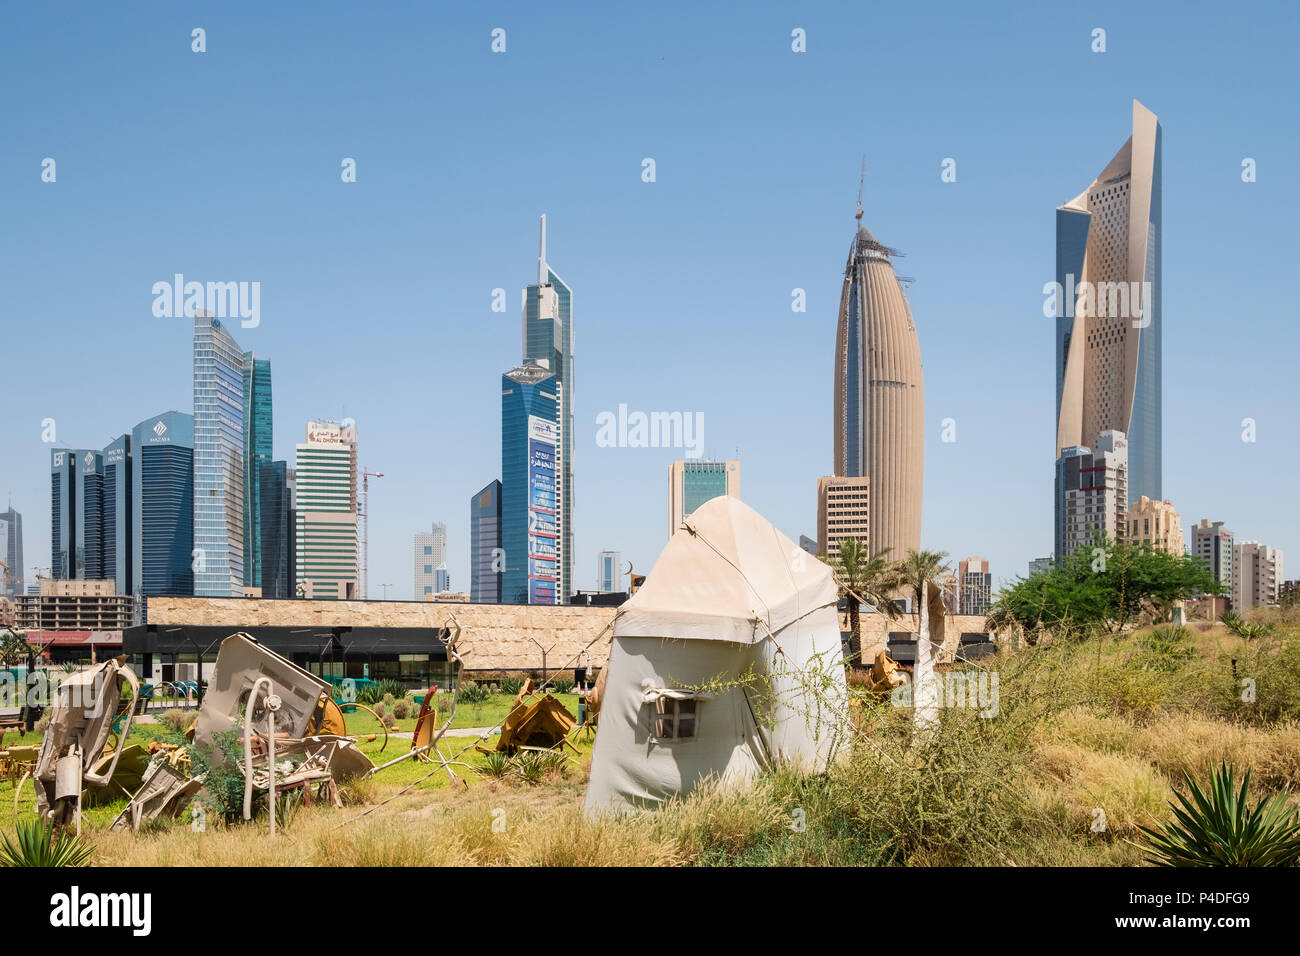 Skyline of CBD Central Business District from  Al Shaheed Park in Kuwait City, Kuwait Stock Photo